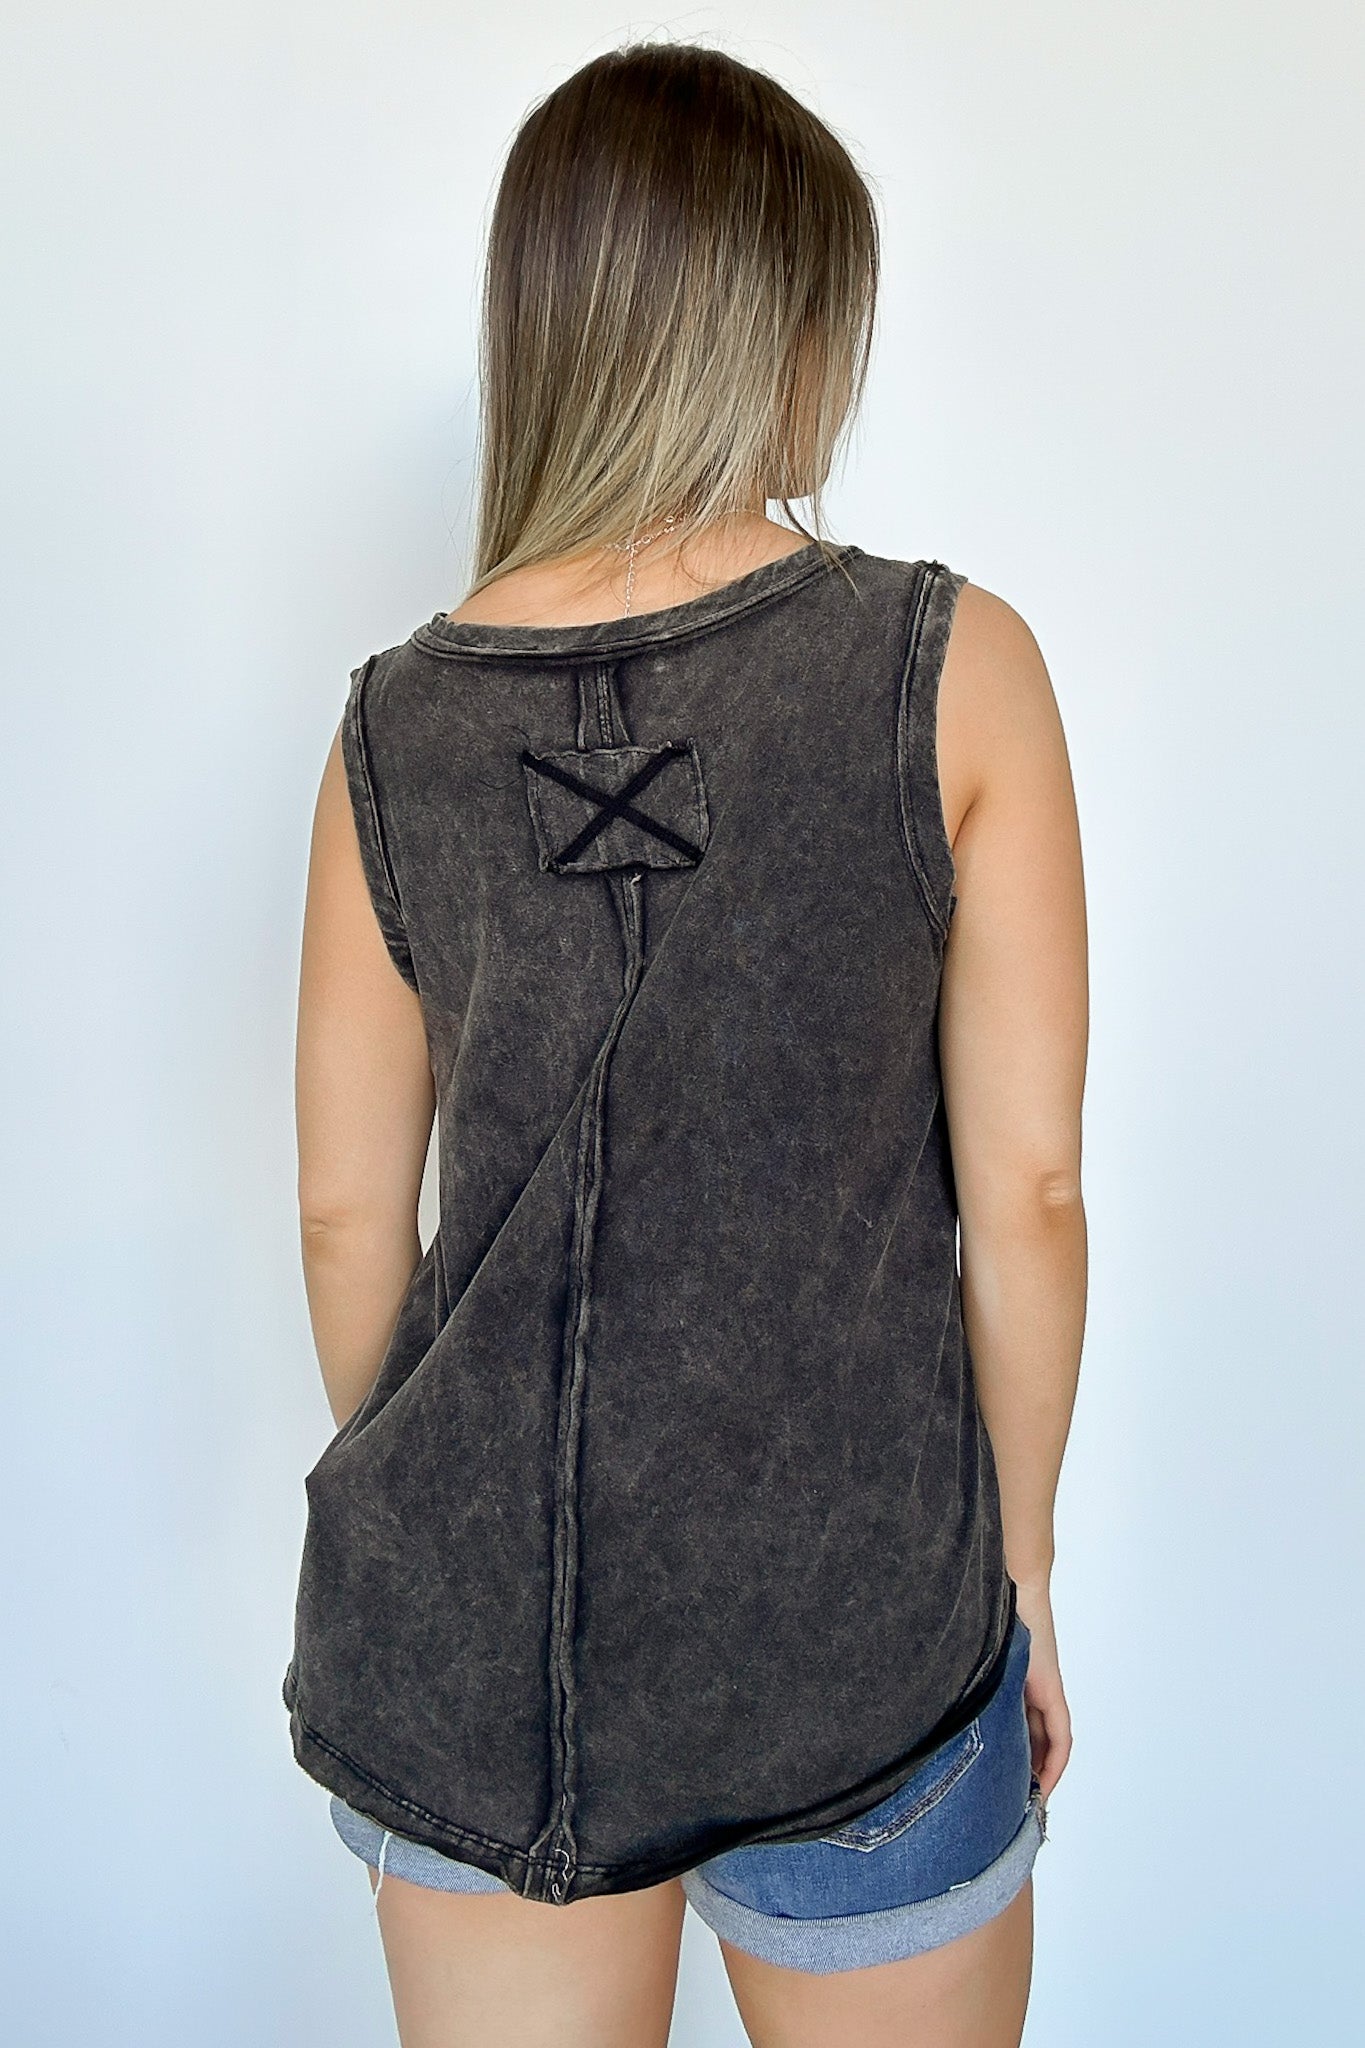  Rima Mineral Wash Flowy Tank Top - Madison and Mallory